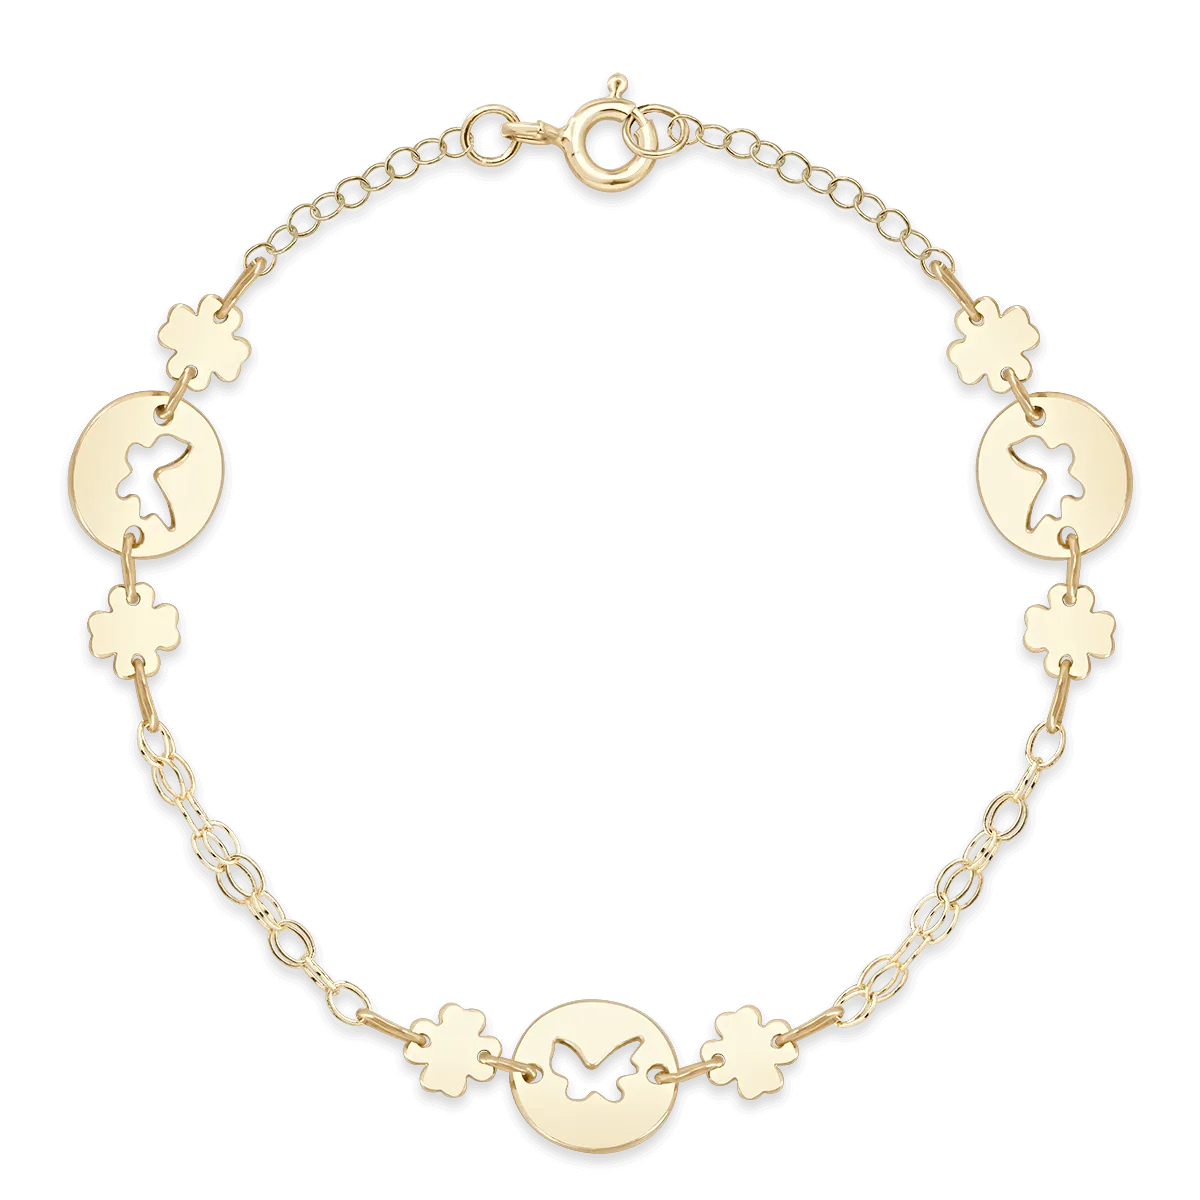 14K yellow gold bracelet with butterflies and clover charms